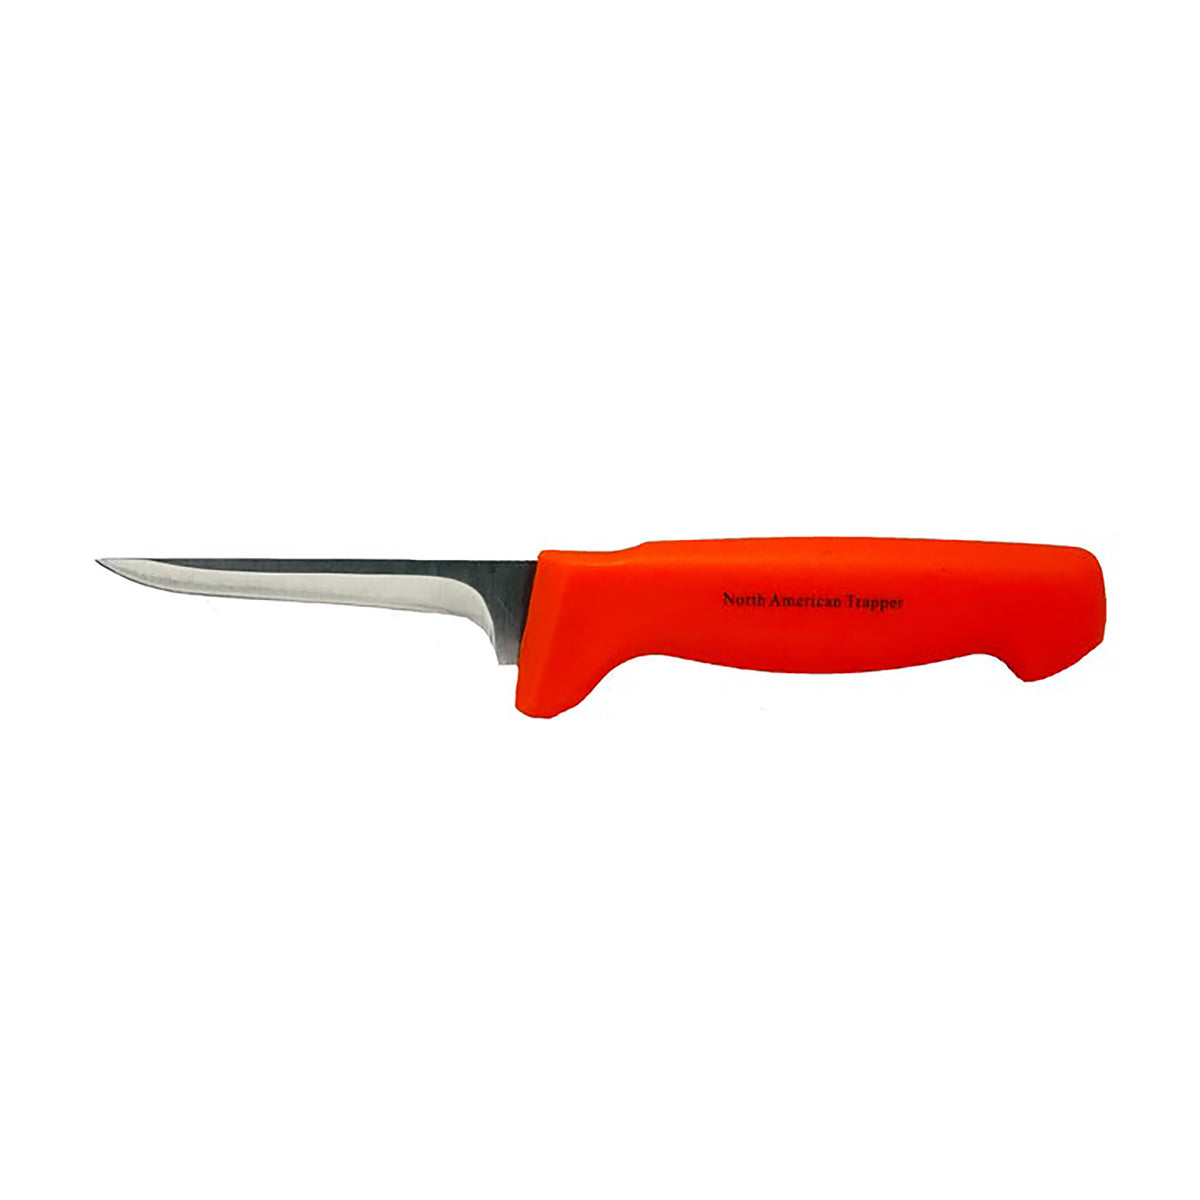 Wiebe 12″ Pro Double Handle Fleshing Knife – North American Trapper